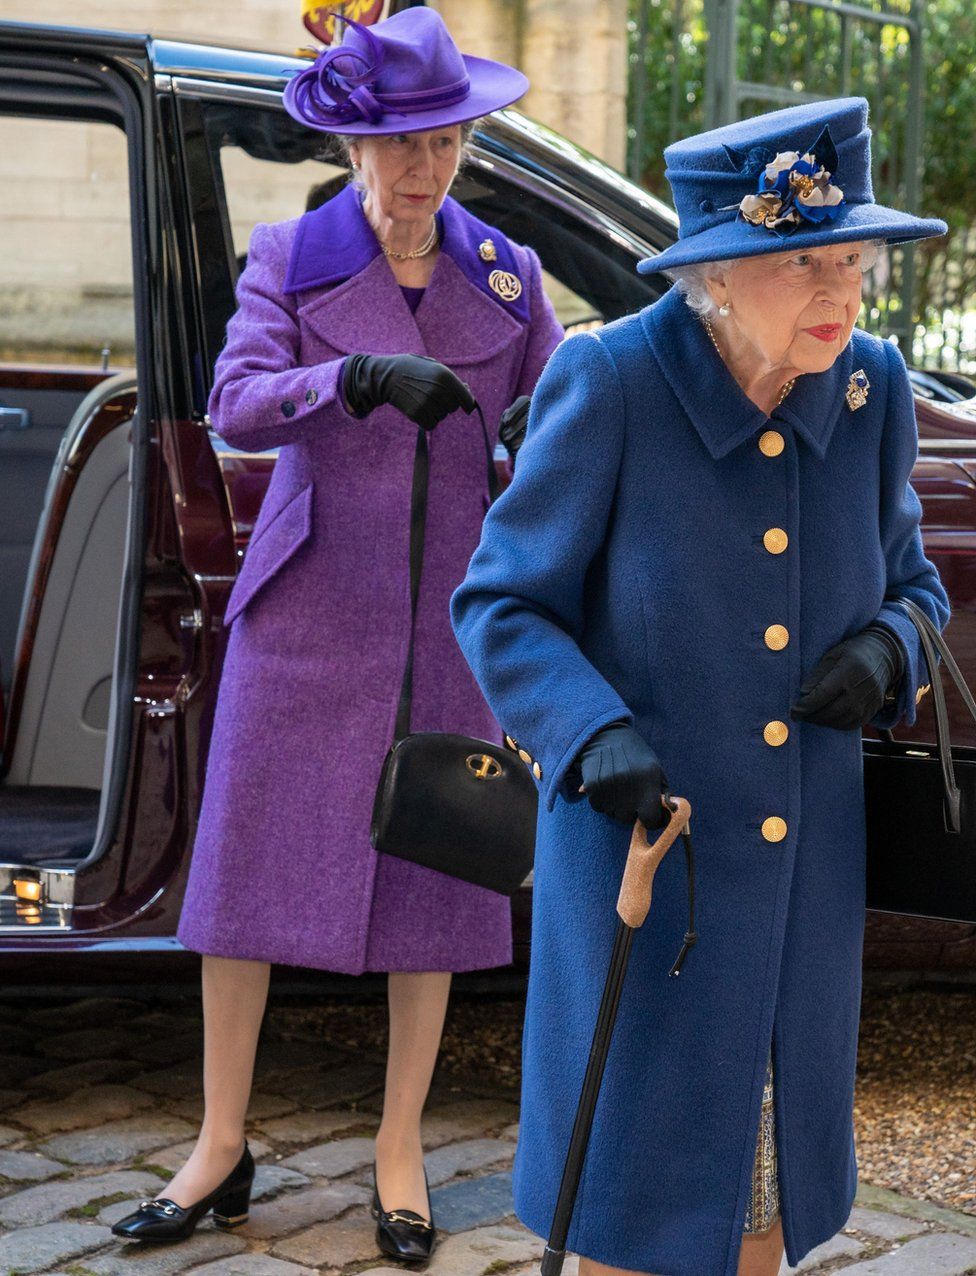 Britain's Queen Elizabeth II (R) and Britain's Princess Anne, Princess Royal (L) arrive to attend a Service of Thanksgiving to mark the Centenary of the Royal British Legion at Westminster Abbey in London on October 12, 2021.